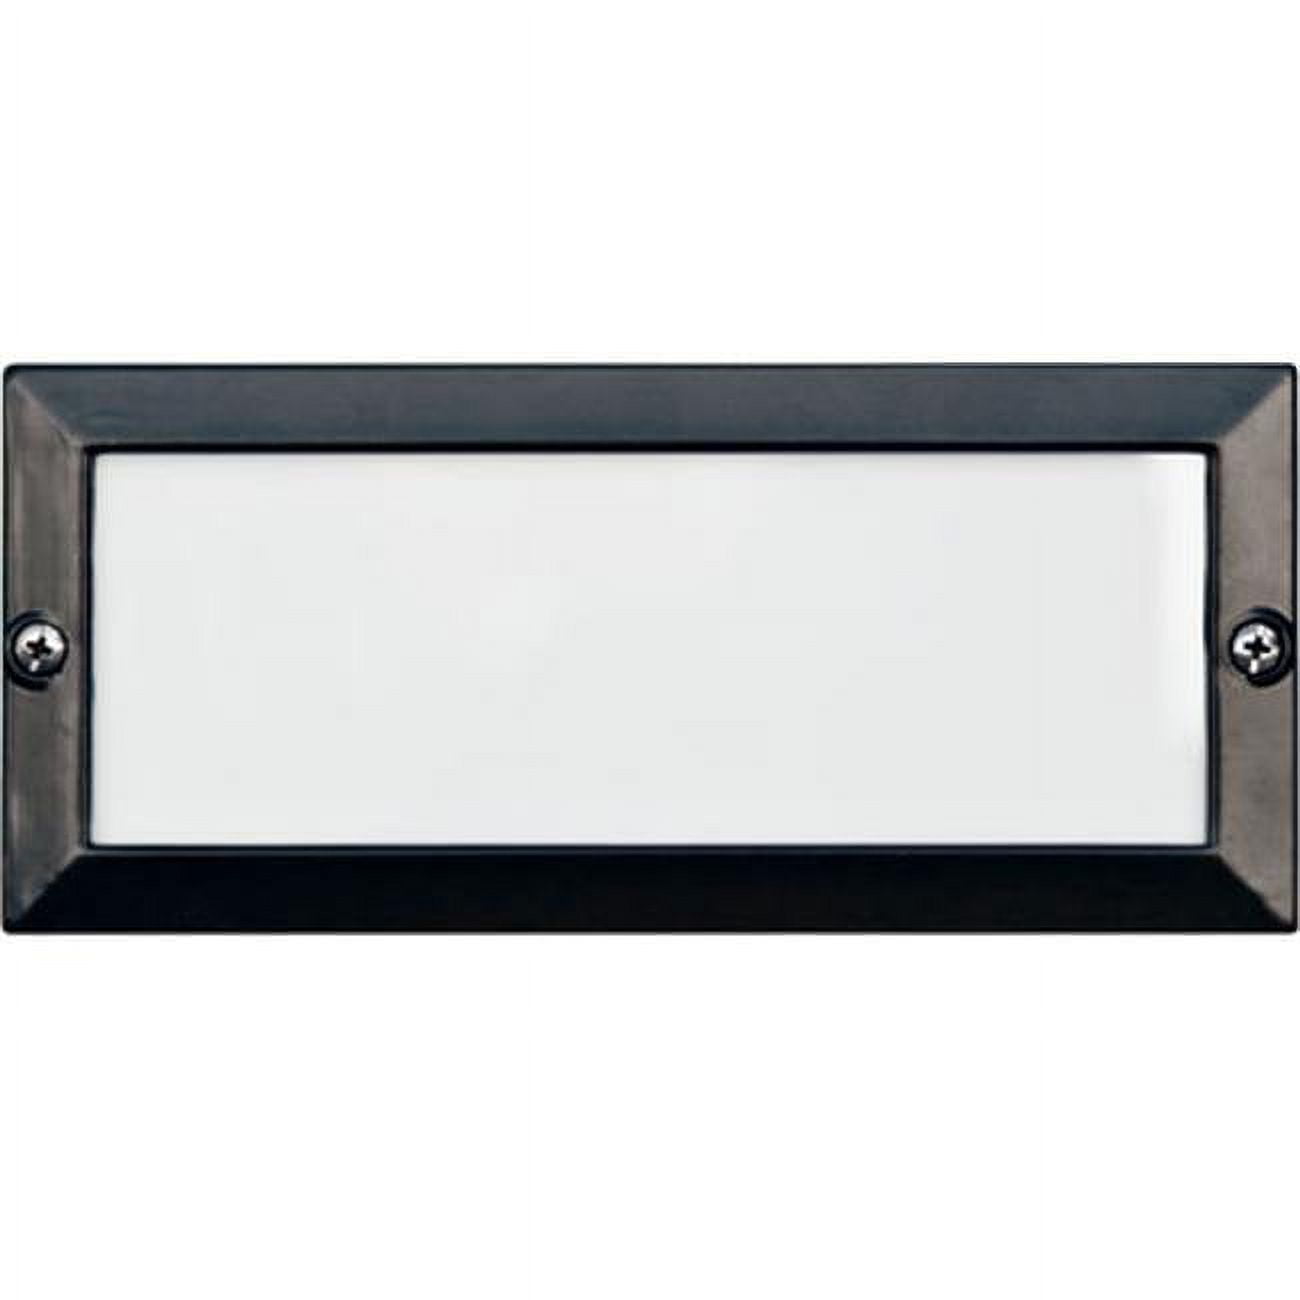 Picture of Dabmar Lighting LV602-B Cast Aluminum Recessed Open Face Brick, Step & Wall Light, Black - 4 x 9.13 x 3.25 in.